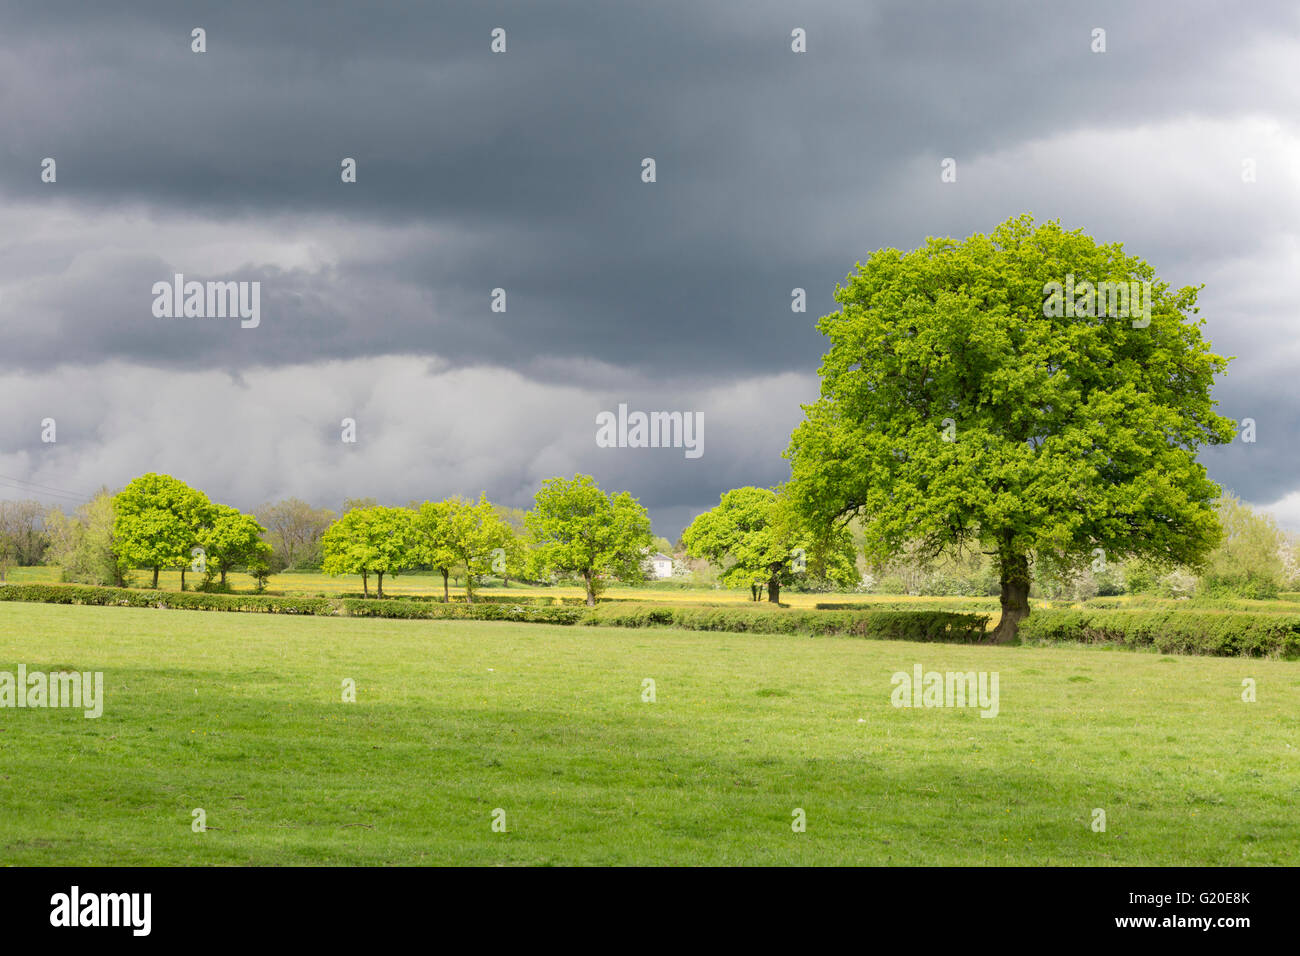 Storm clouds over an English landscape, England, UK Stock Photo